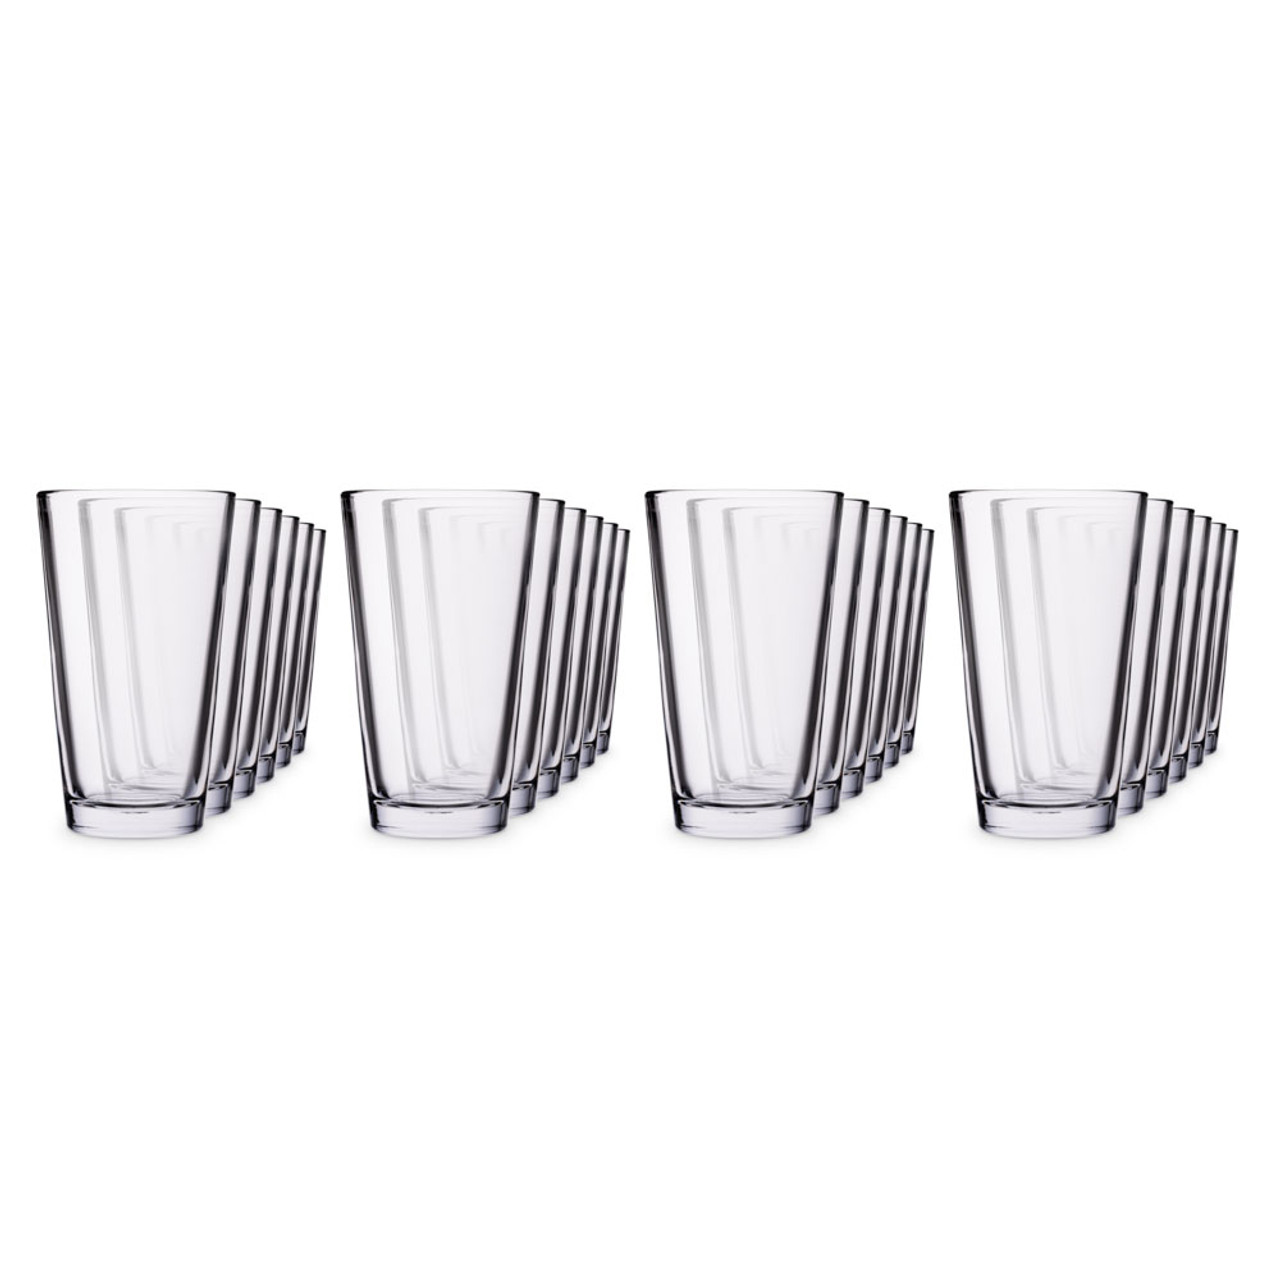 Anchor 176FU Mixing Glasses, 16oz, Clear (Case of 24)